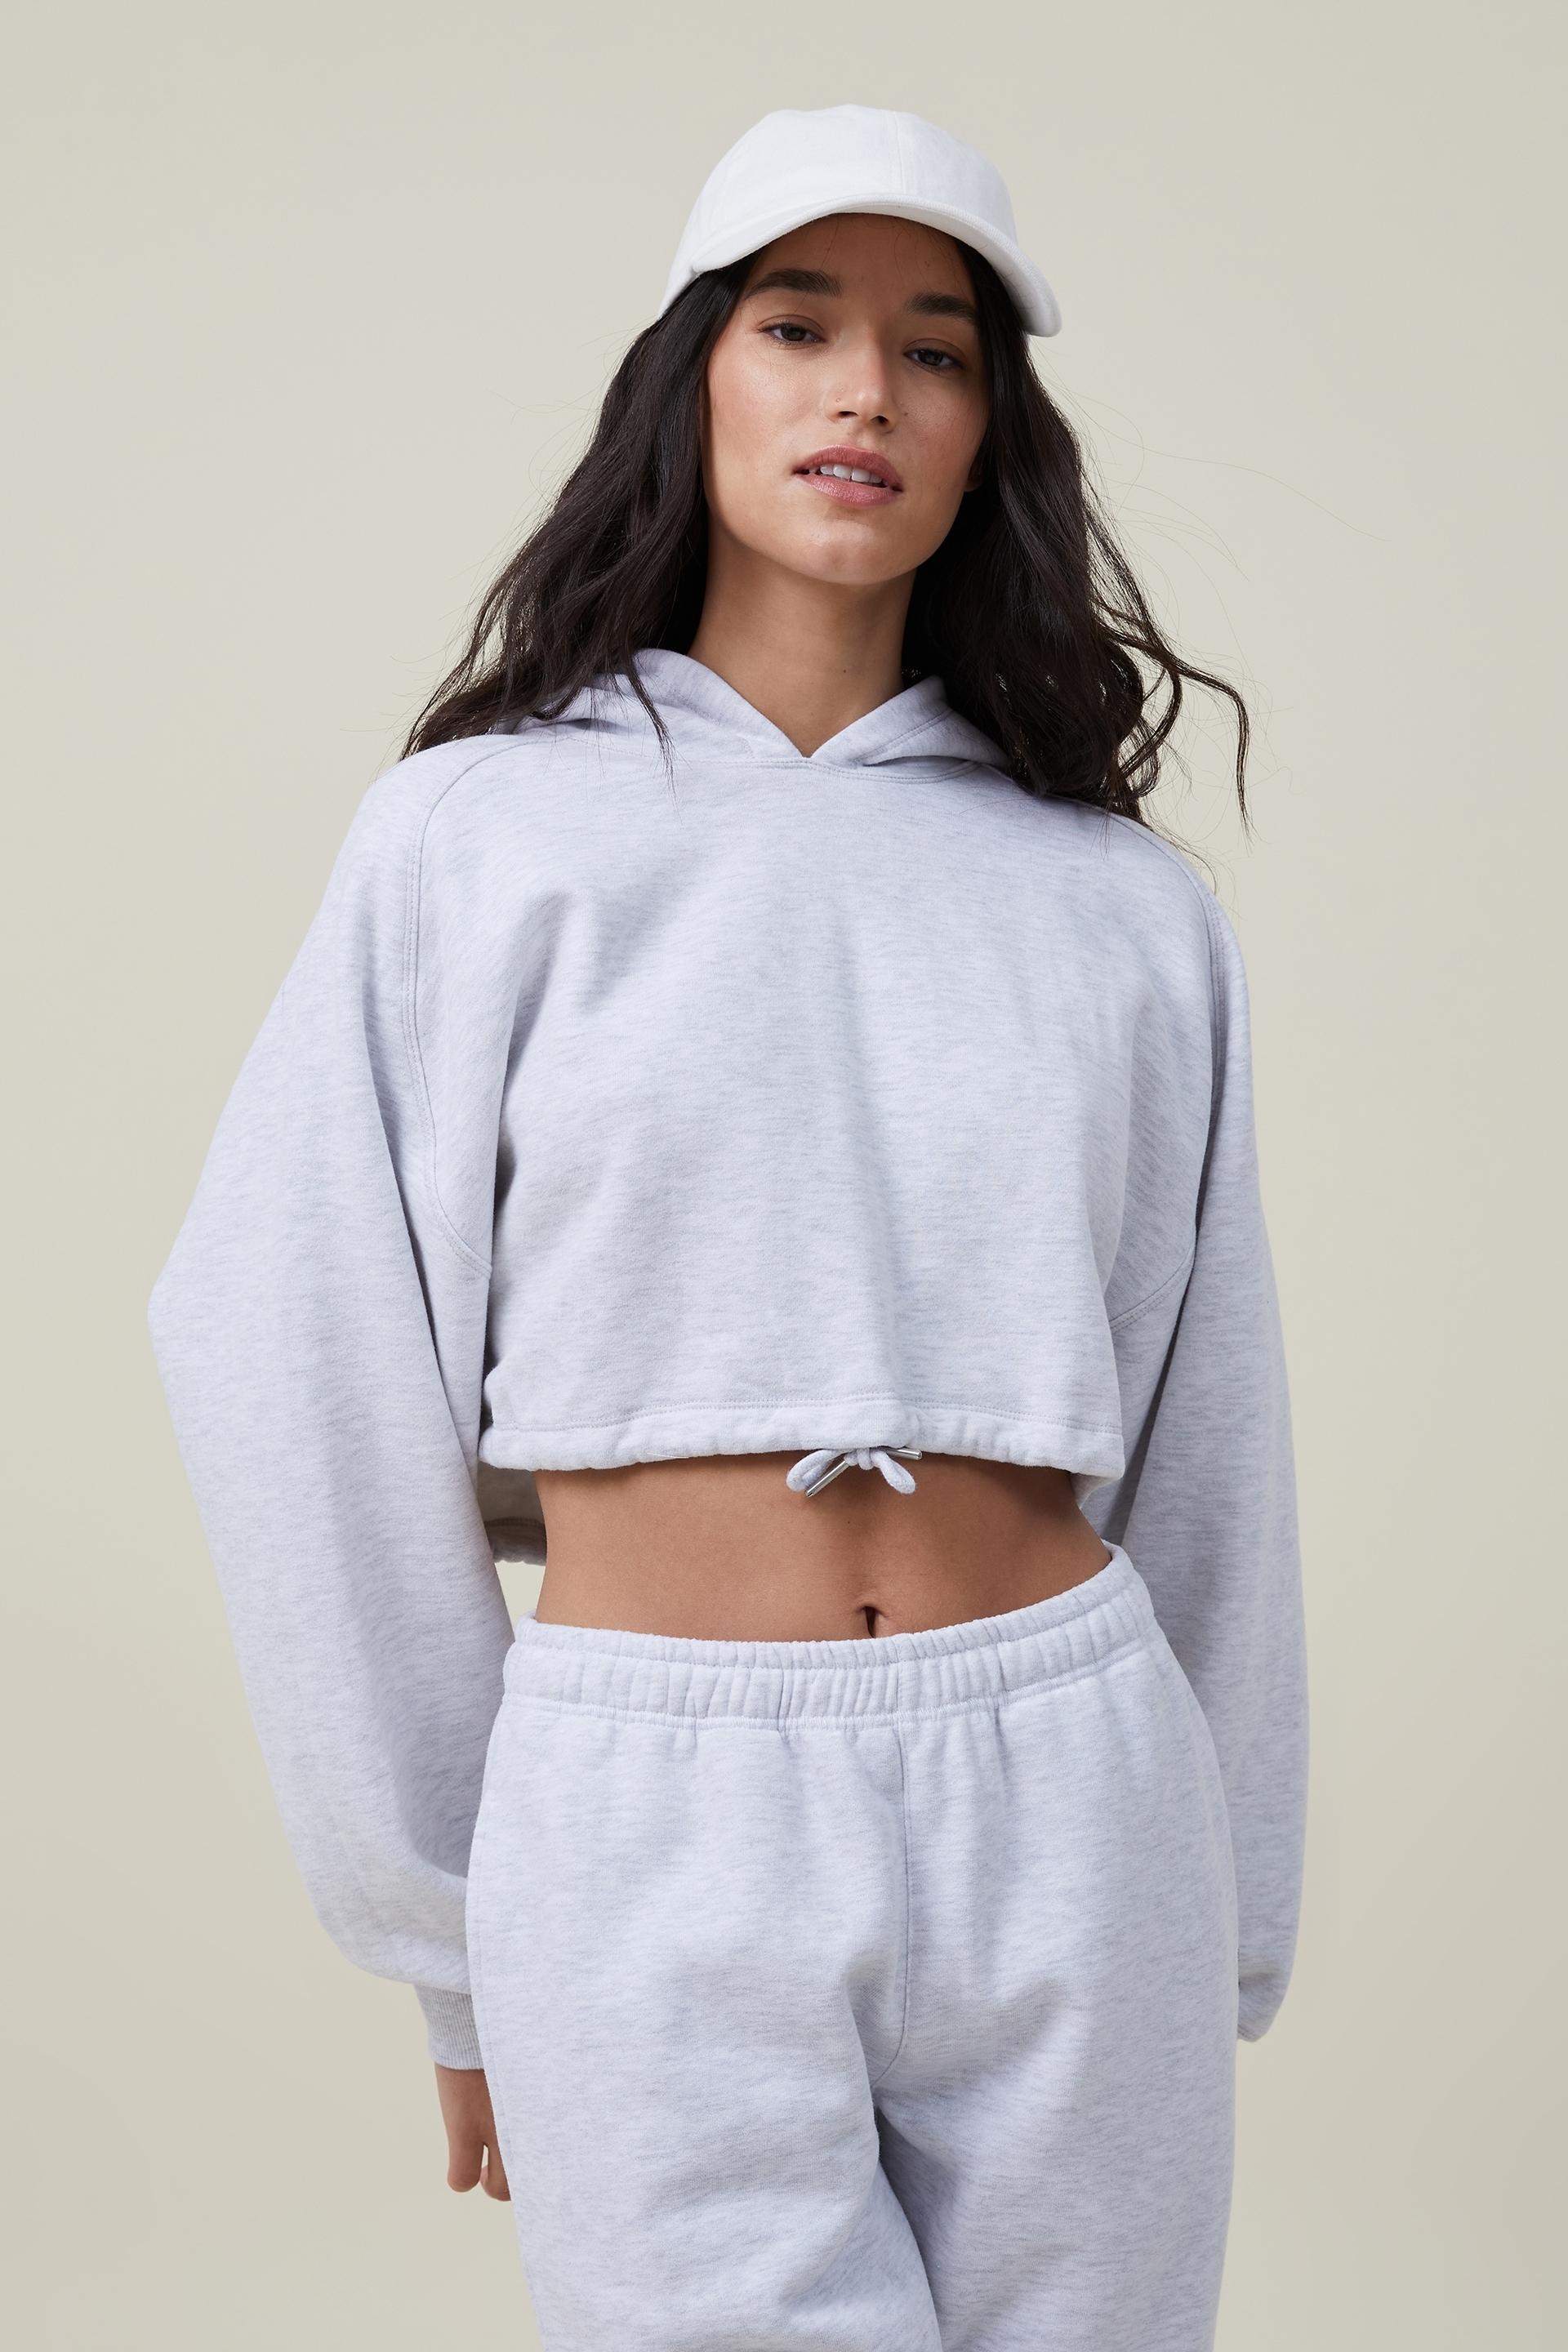 Plush cropped hoodie - cloudy grey marle Cotton On Hoodies, Sweats ...